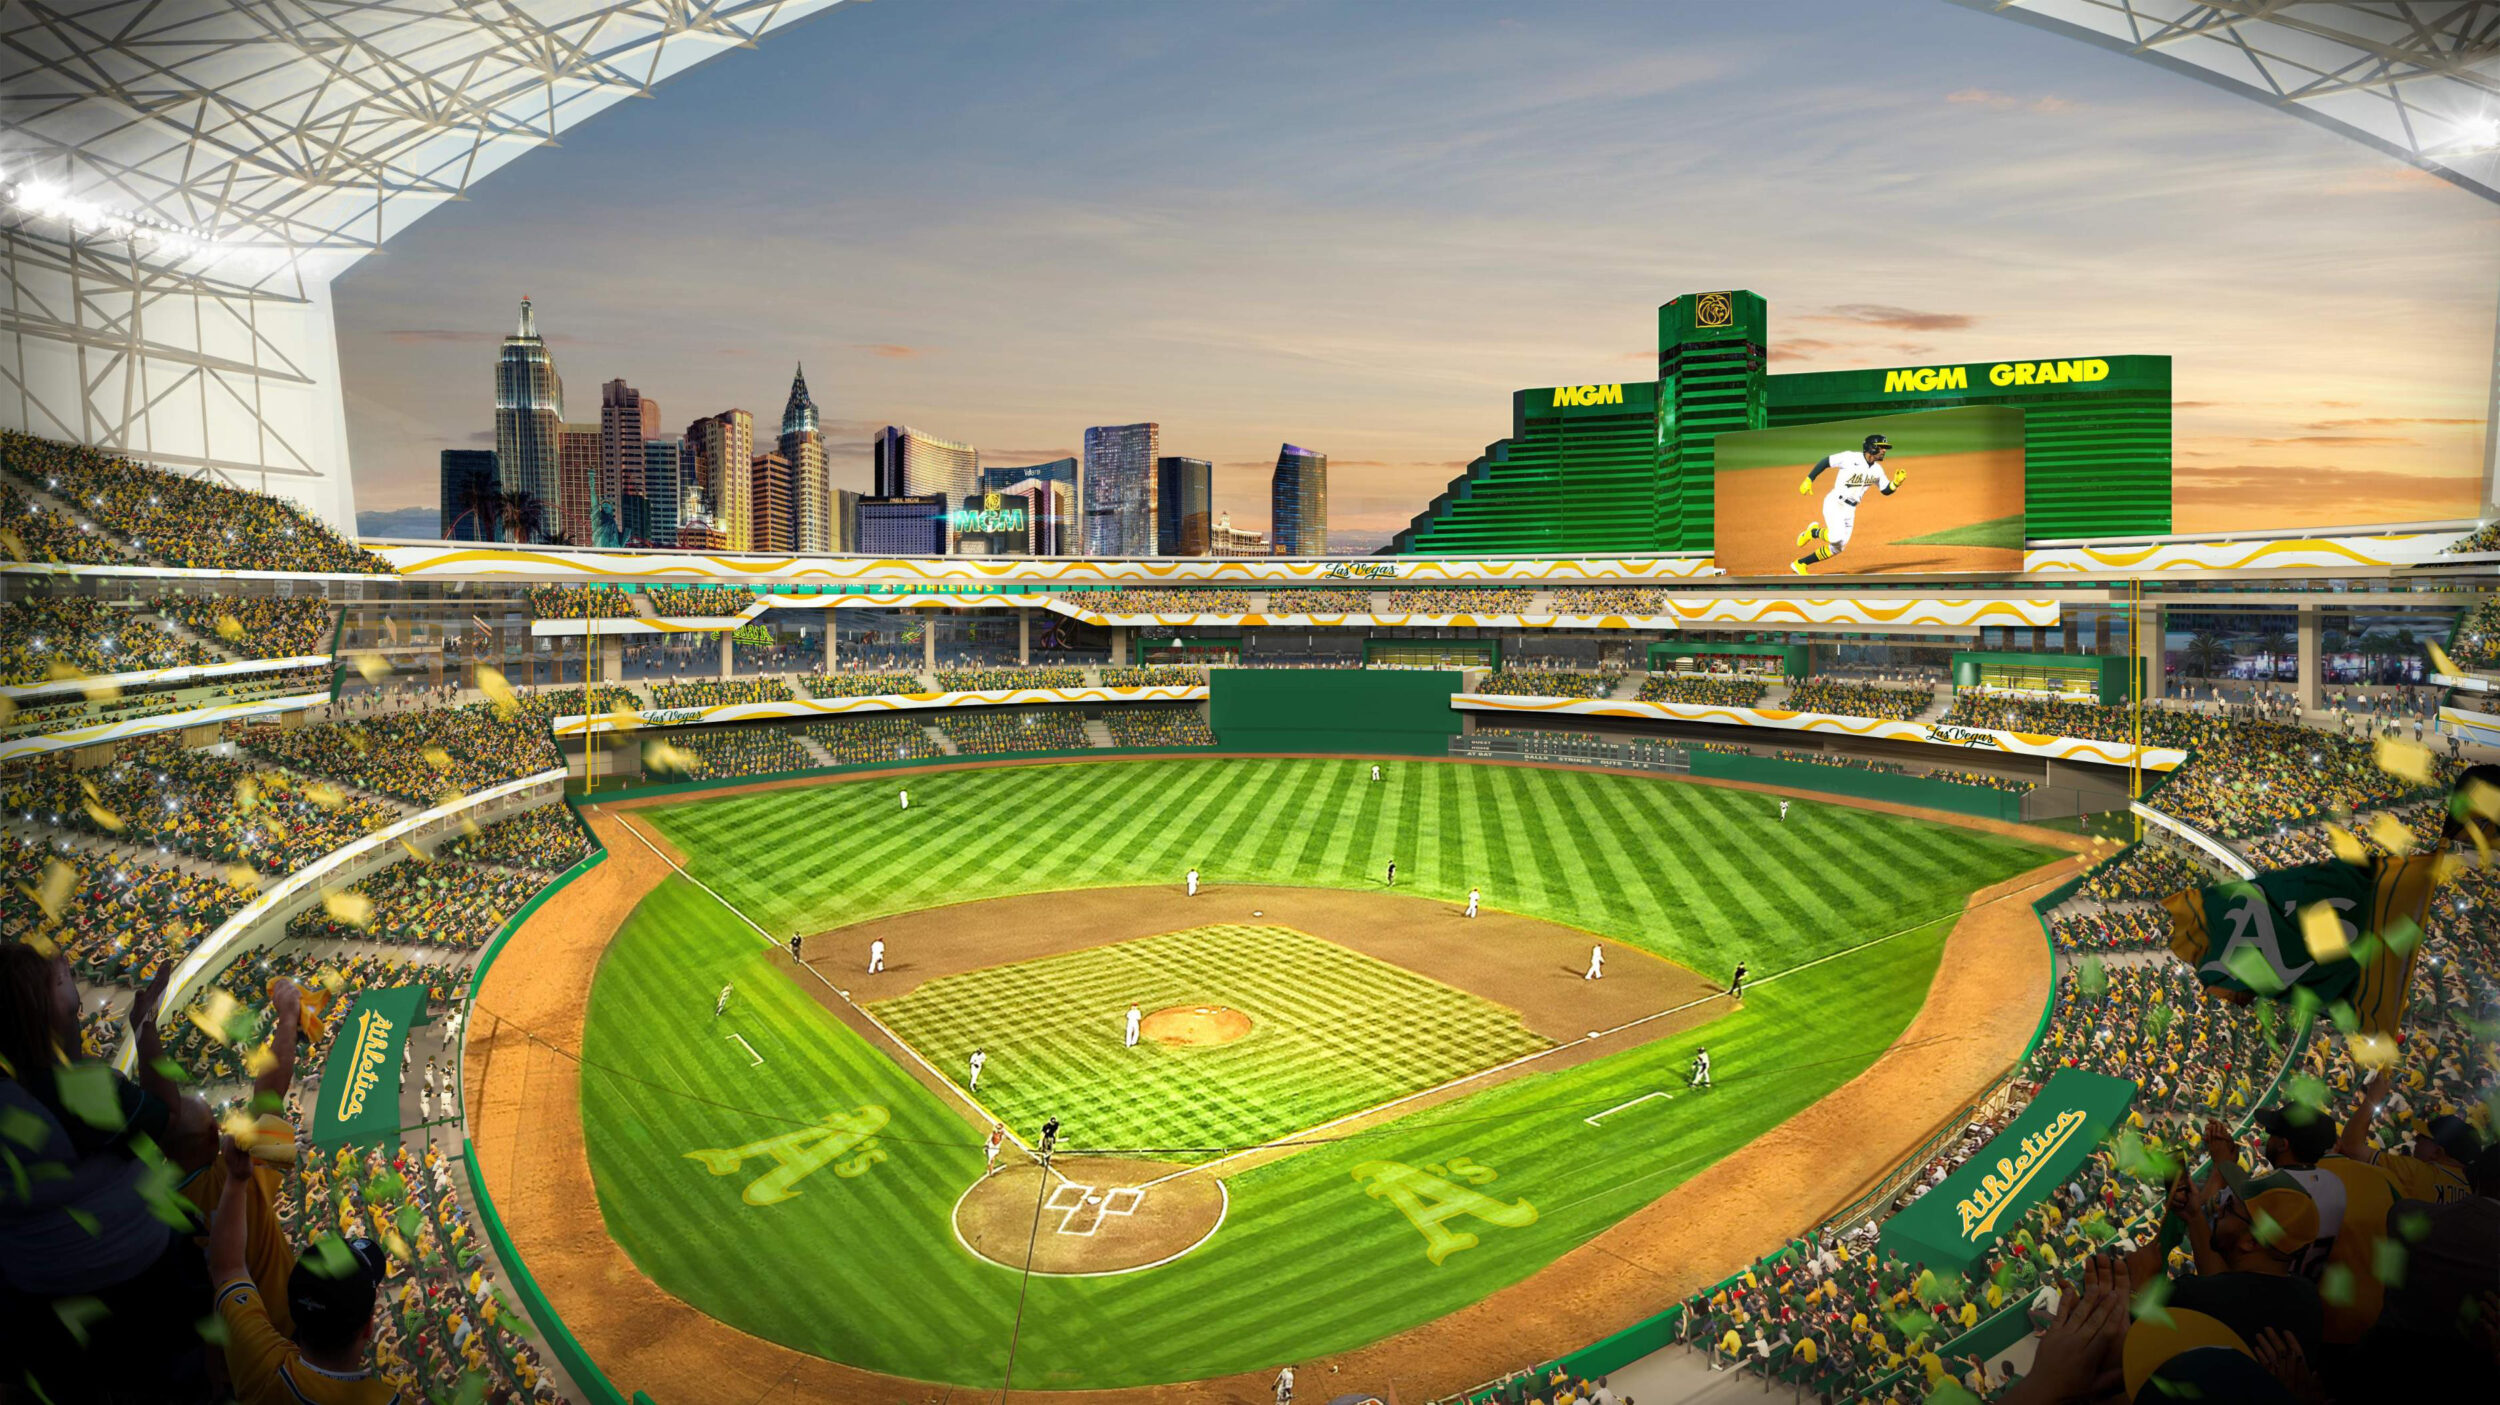 A rendering of a baseball stadium with a brightly lit green field with a city skyline beyond the stadium's edge.